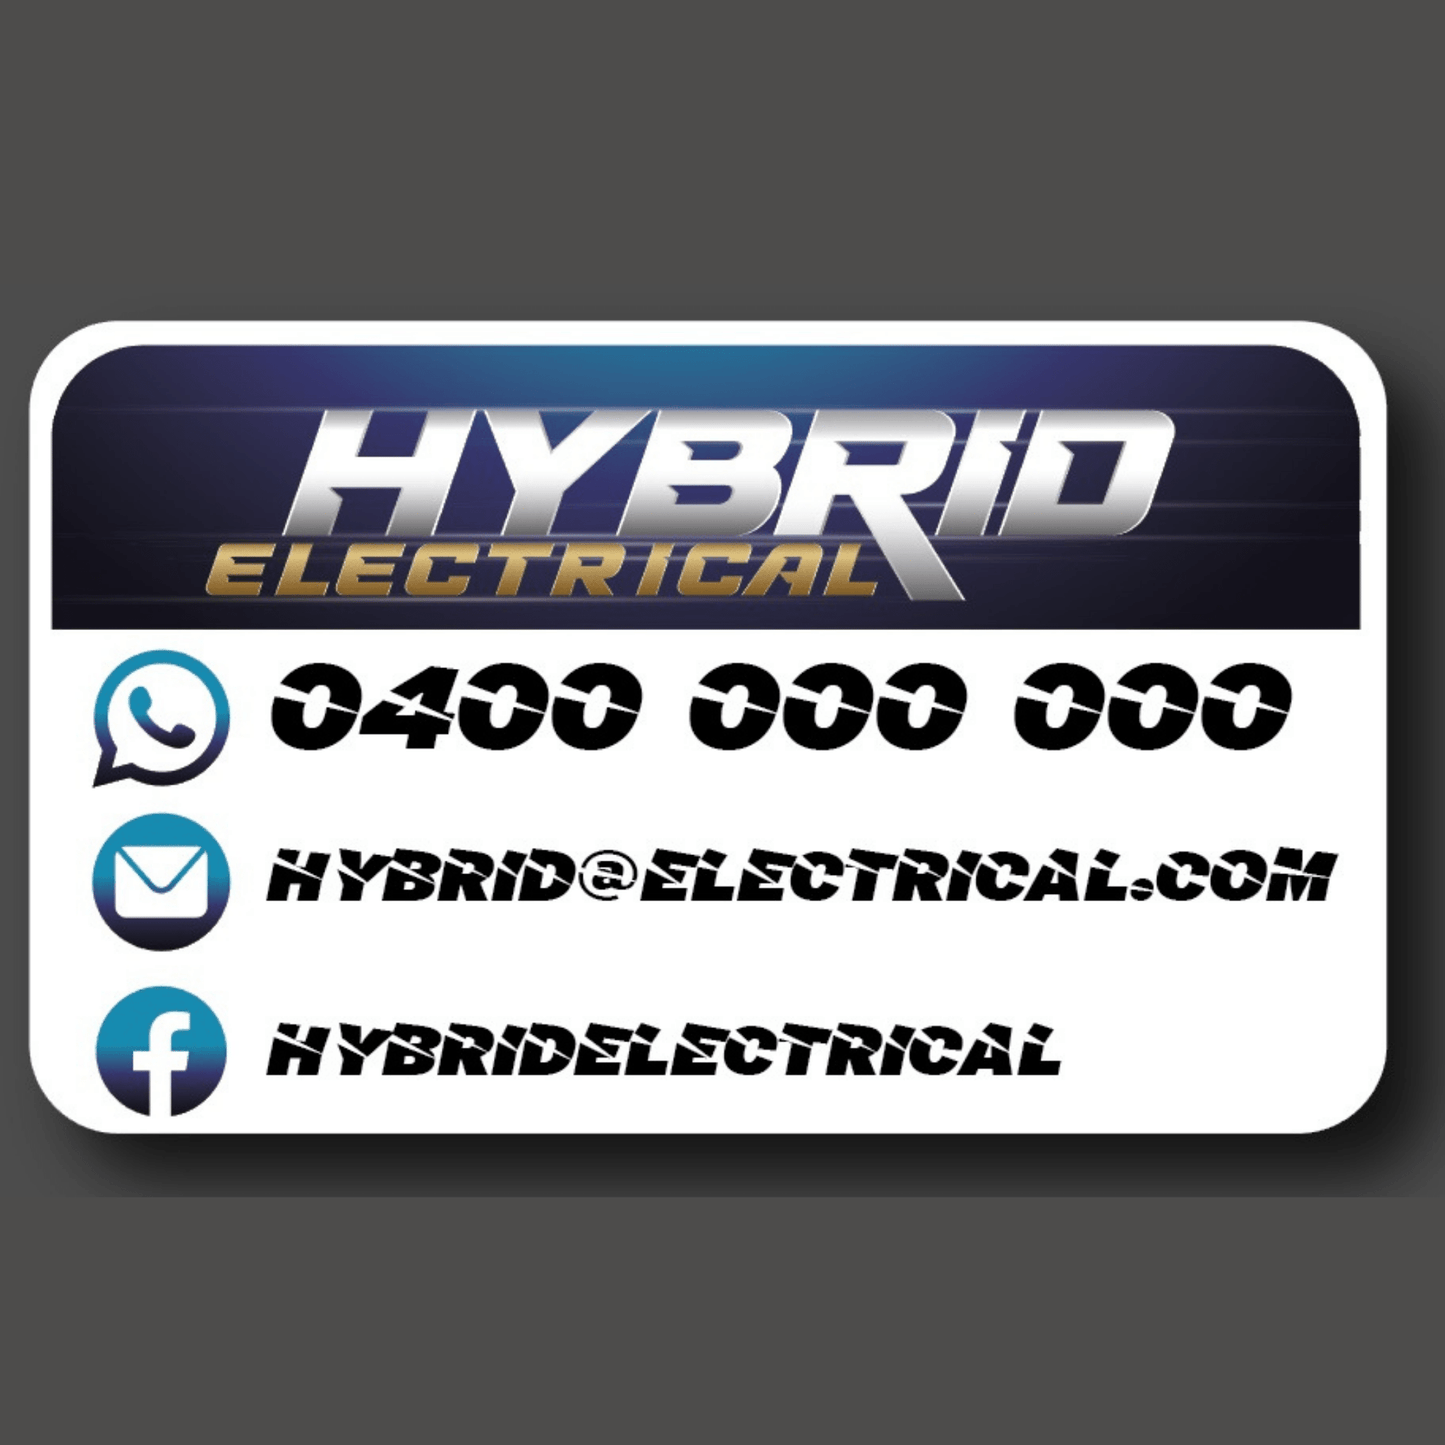 Electrician Customised Vinyl Stickers Each 75 x 45mm Total 128 or 256 Stickers